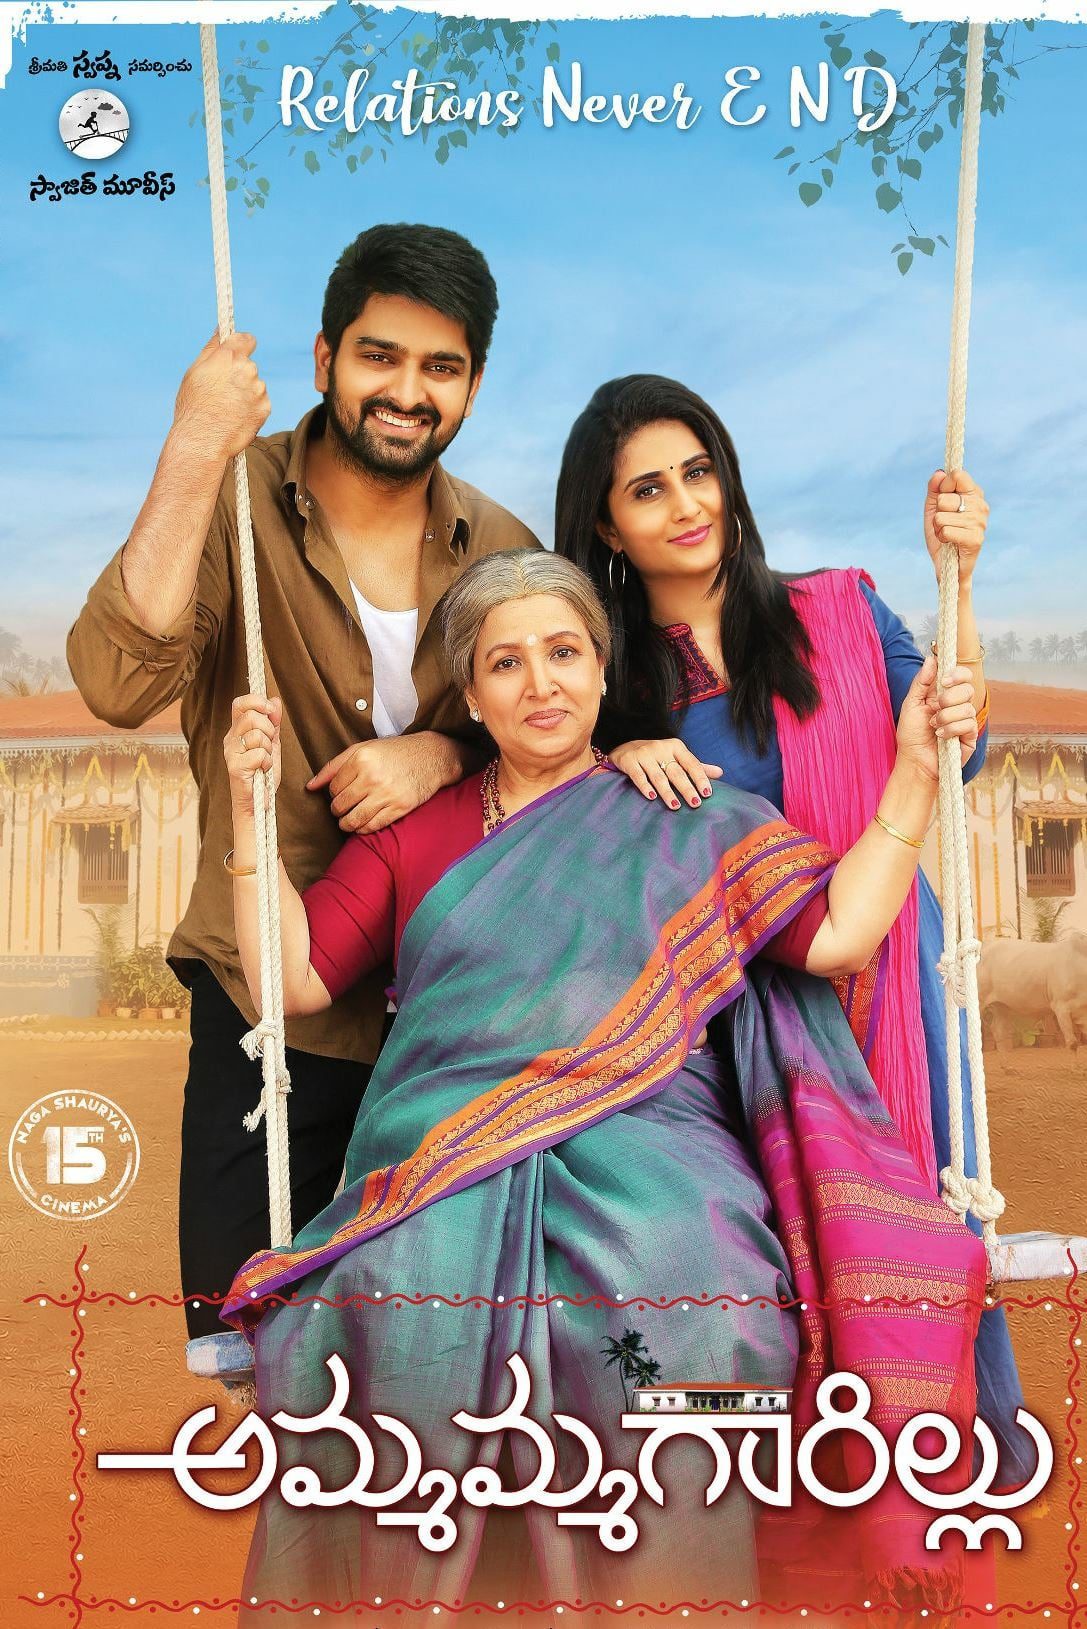 Poster for the movie "Ammammagarillu"